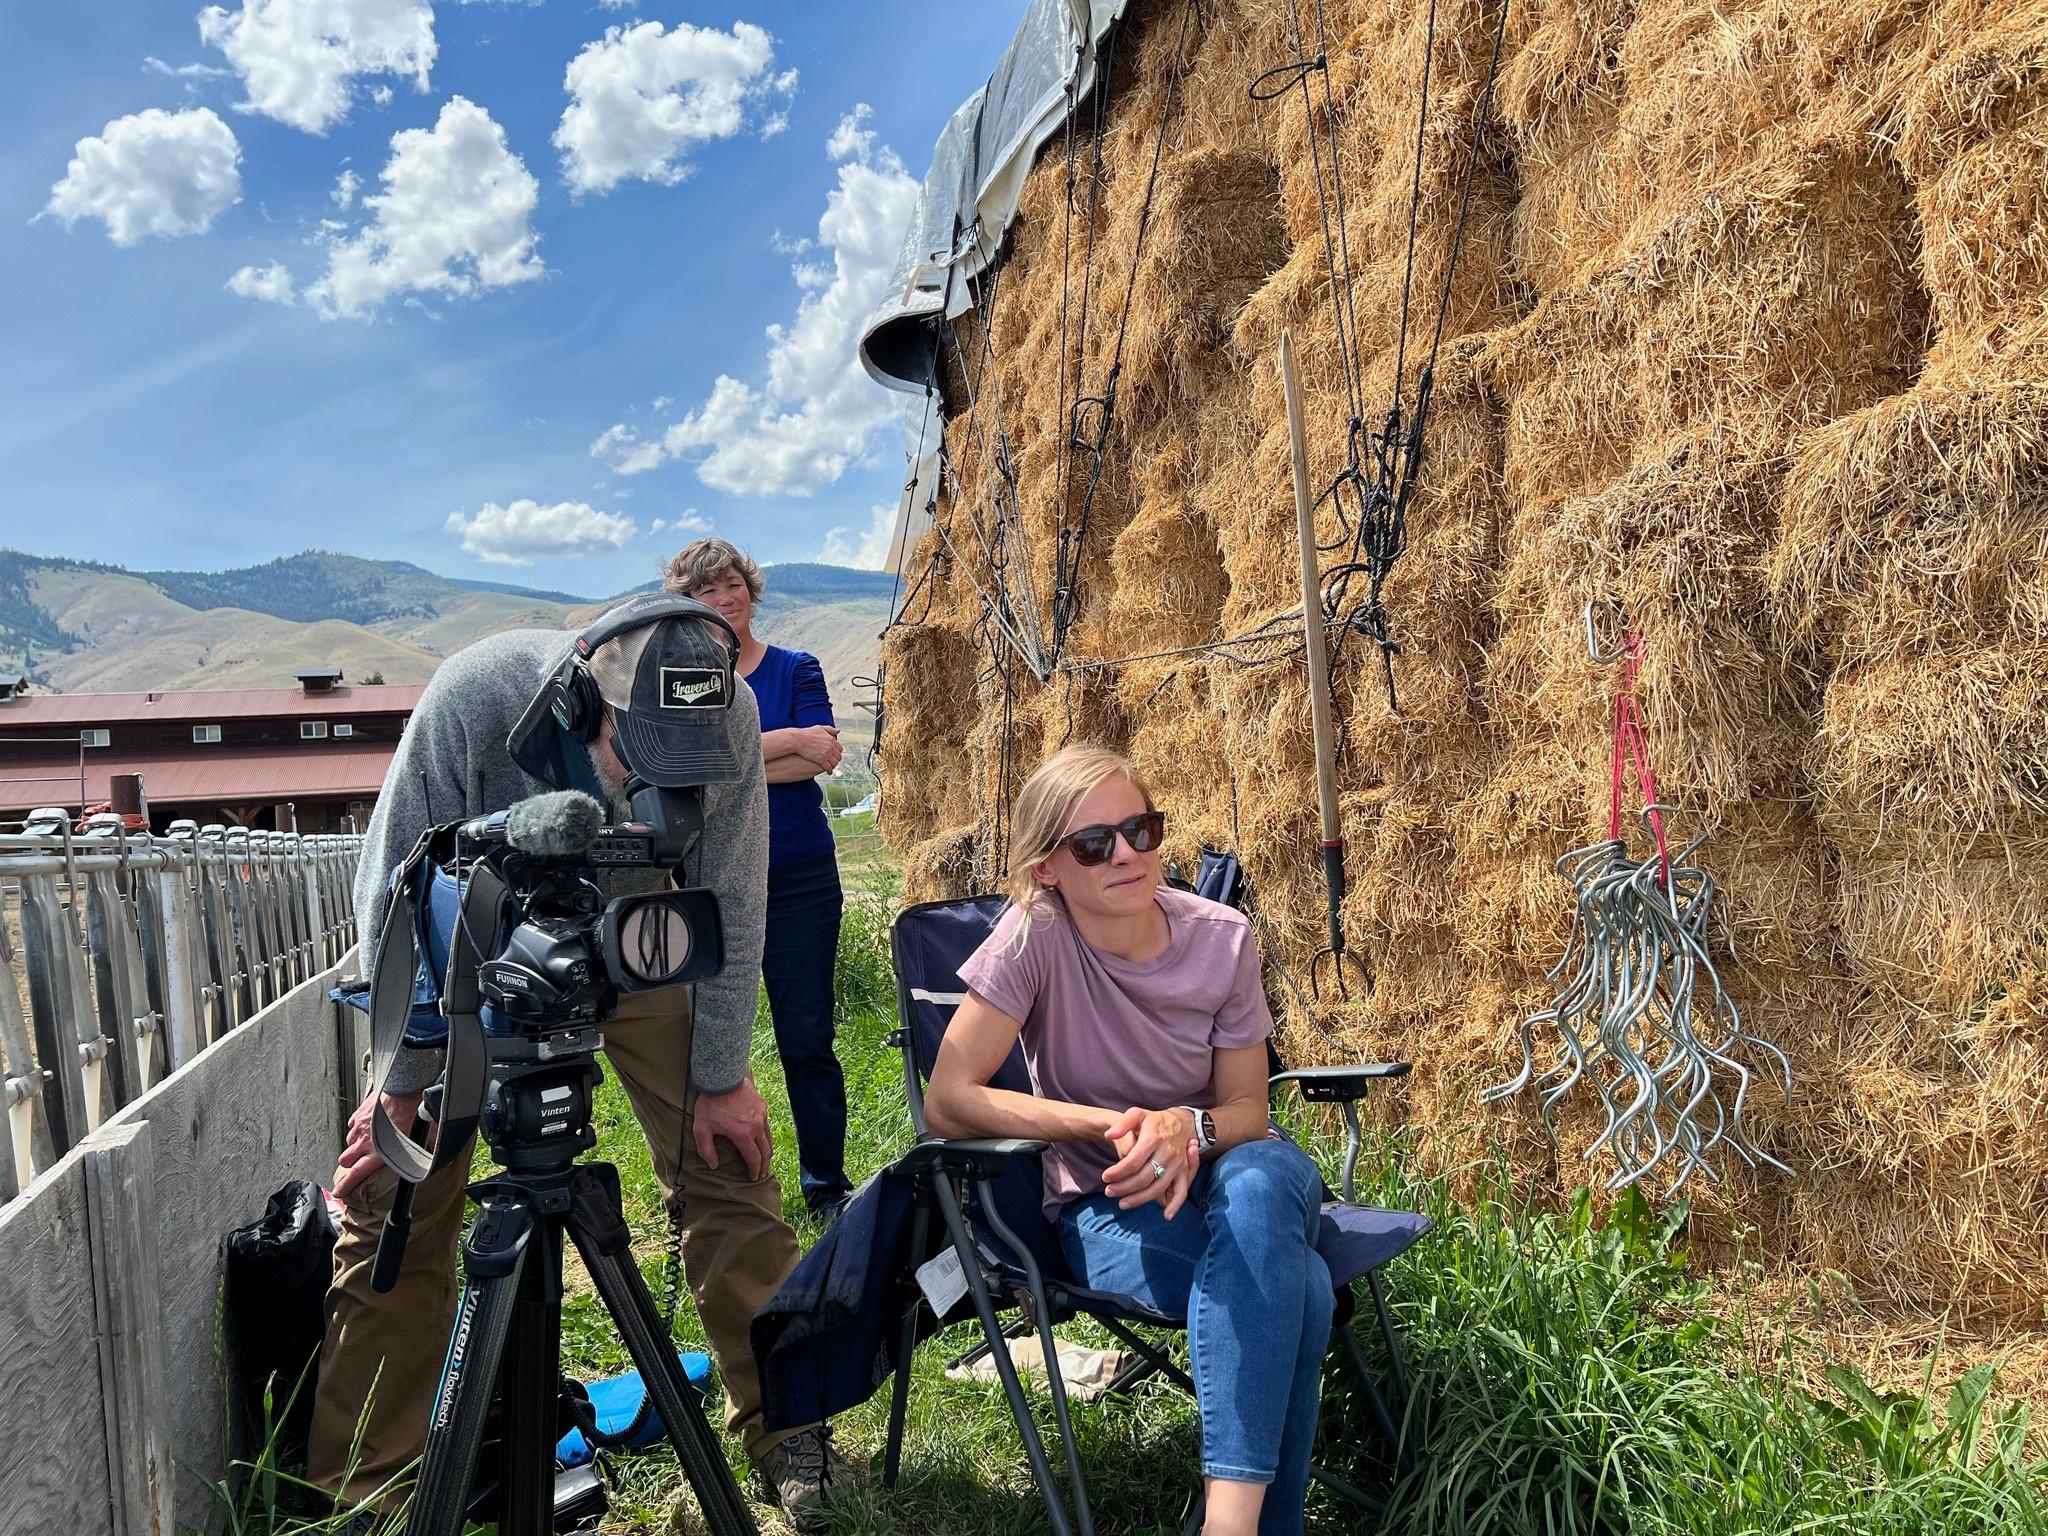 A woman sitting next to a large hay bale while someone films next to her.